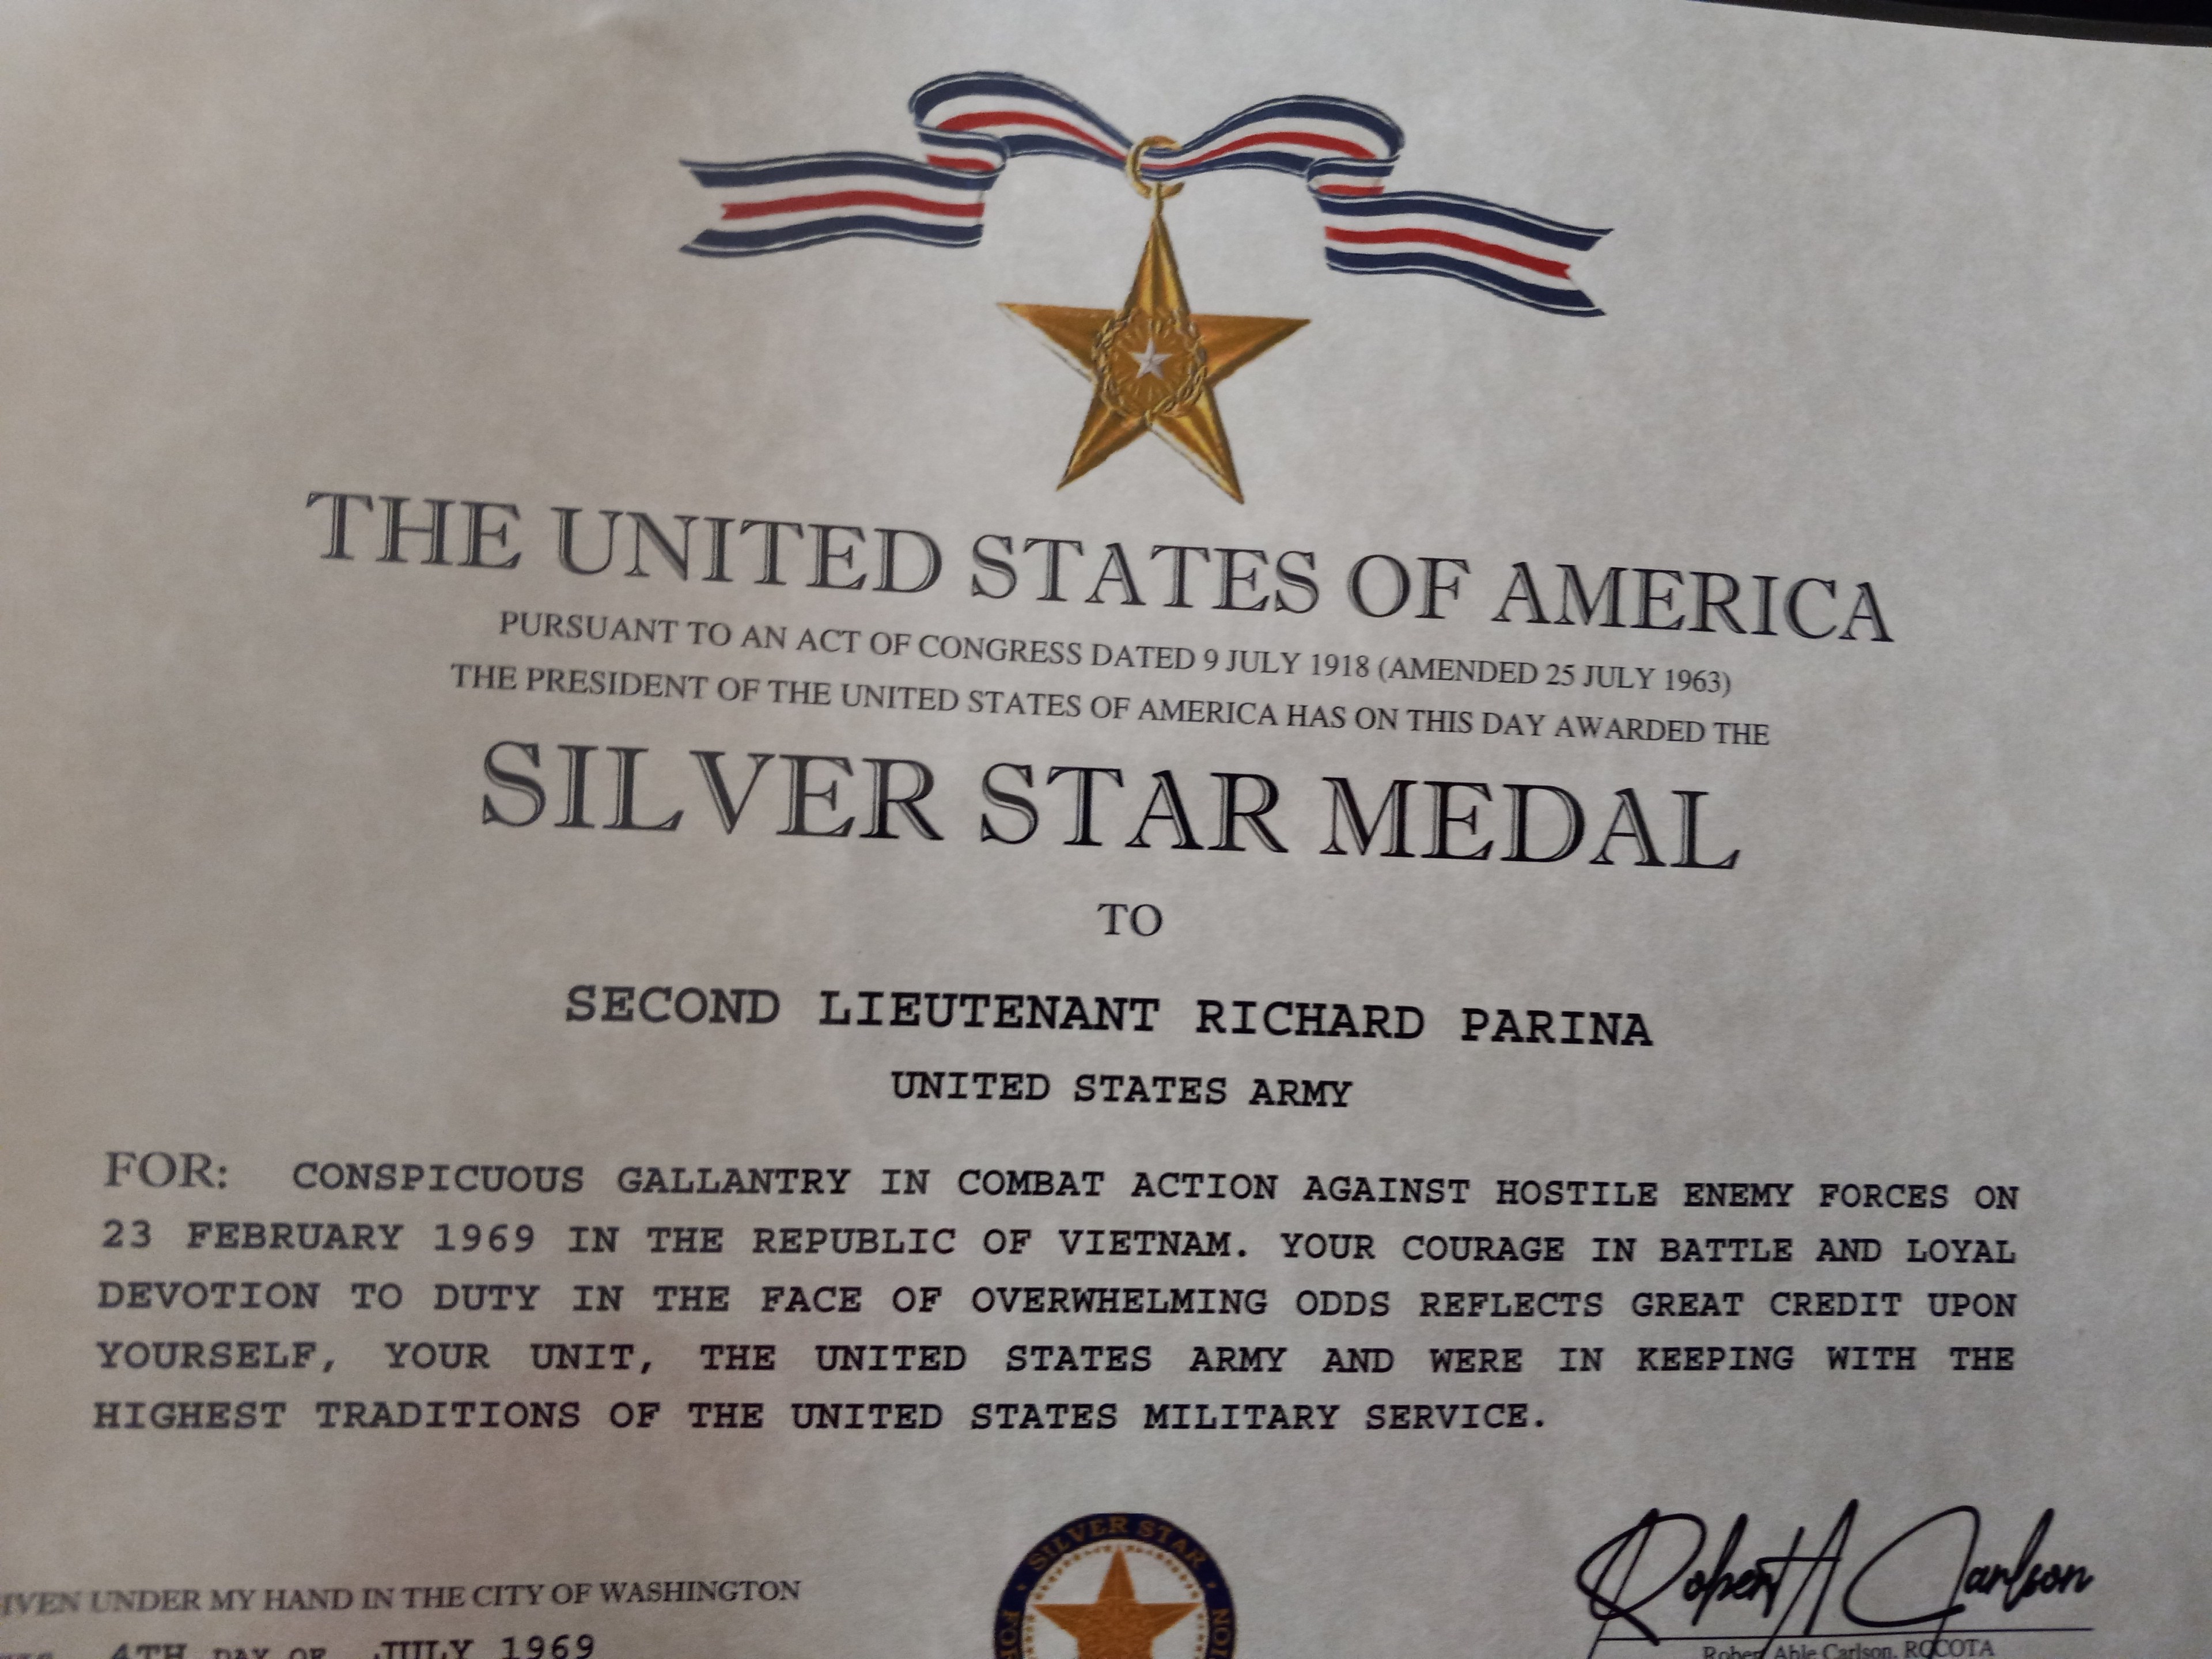 A document that claims to be a Silver Star certificate for Richard Parina.